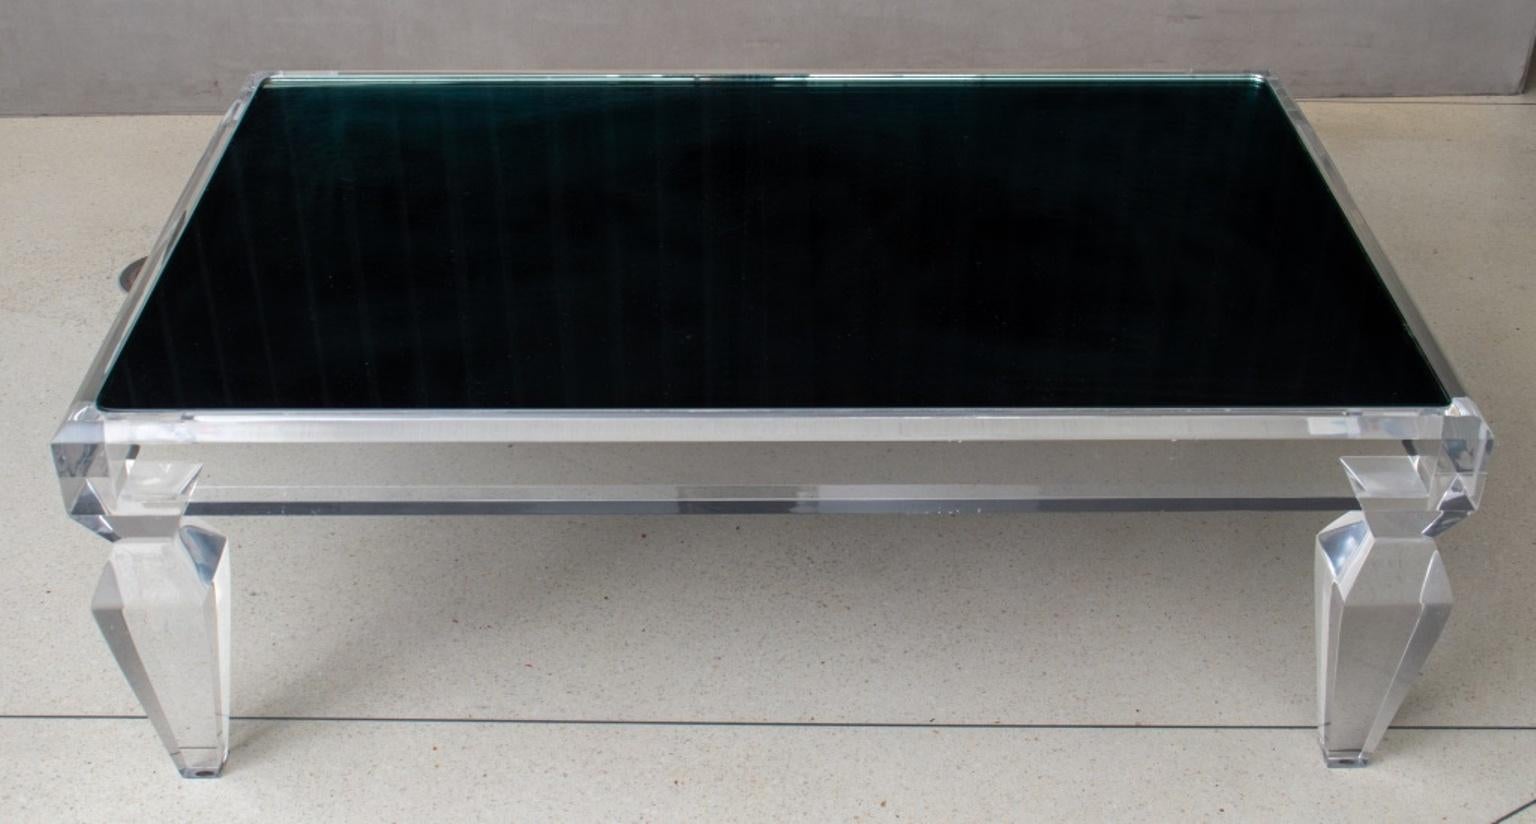 Hollywood Regency Revival low coffee table, with an inset antiqued mirror top, on four lucite legs. 17